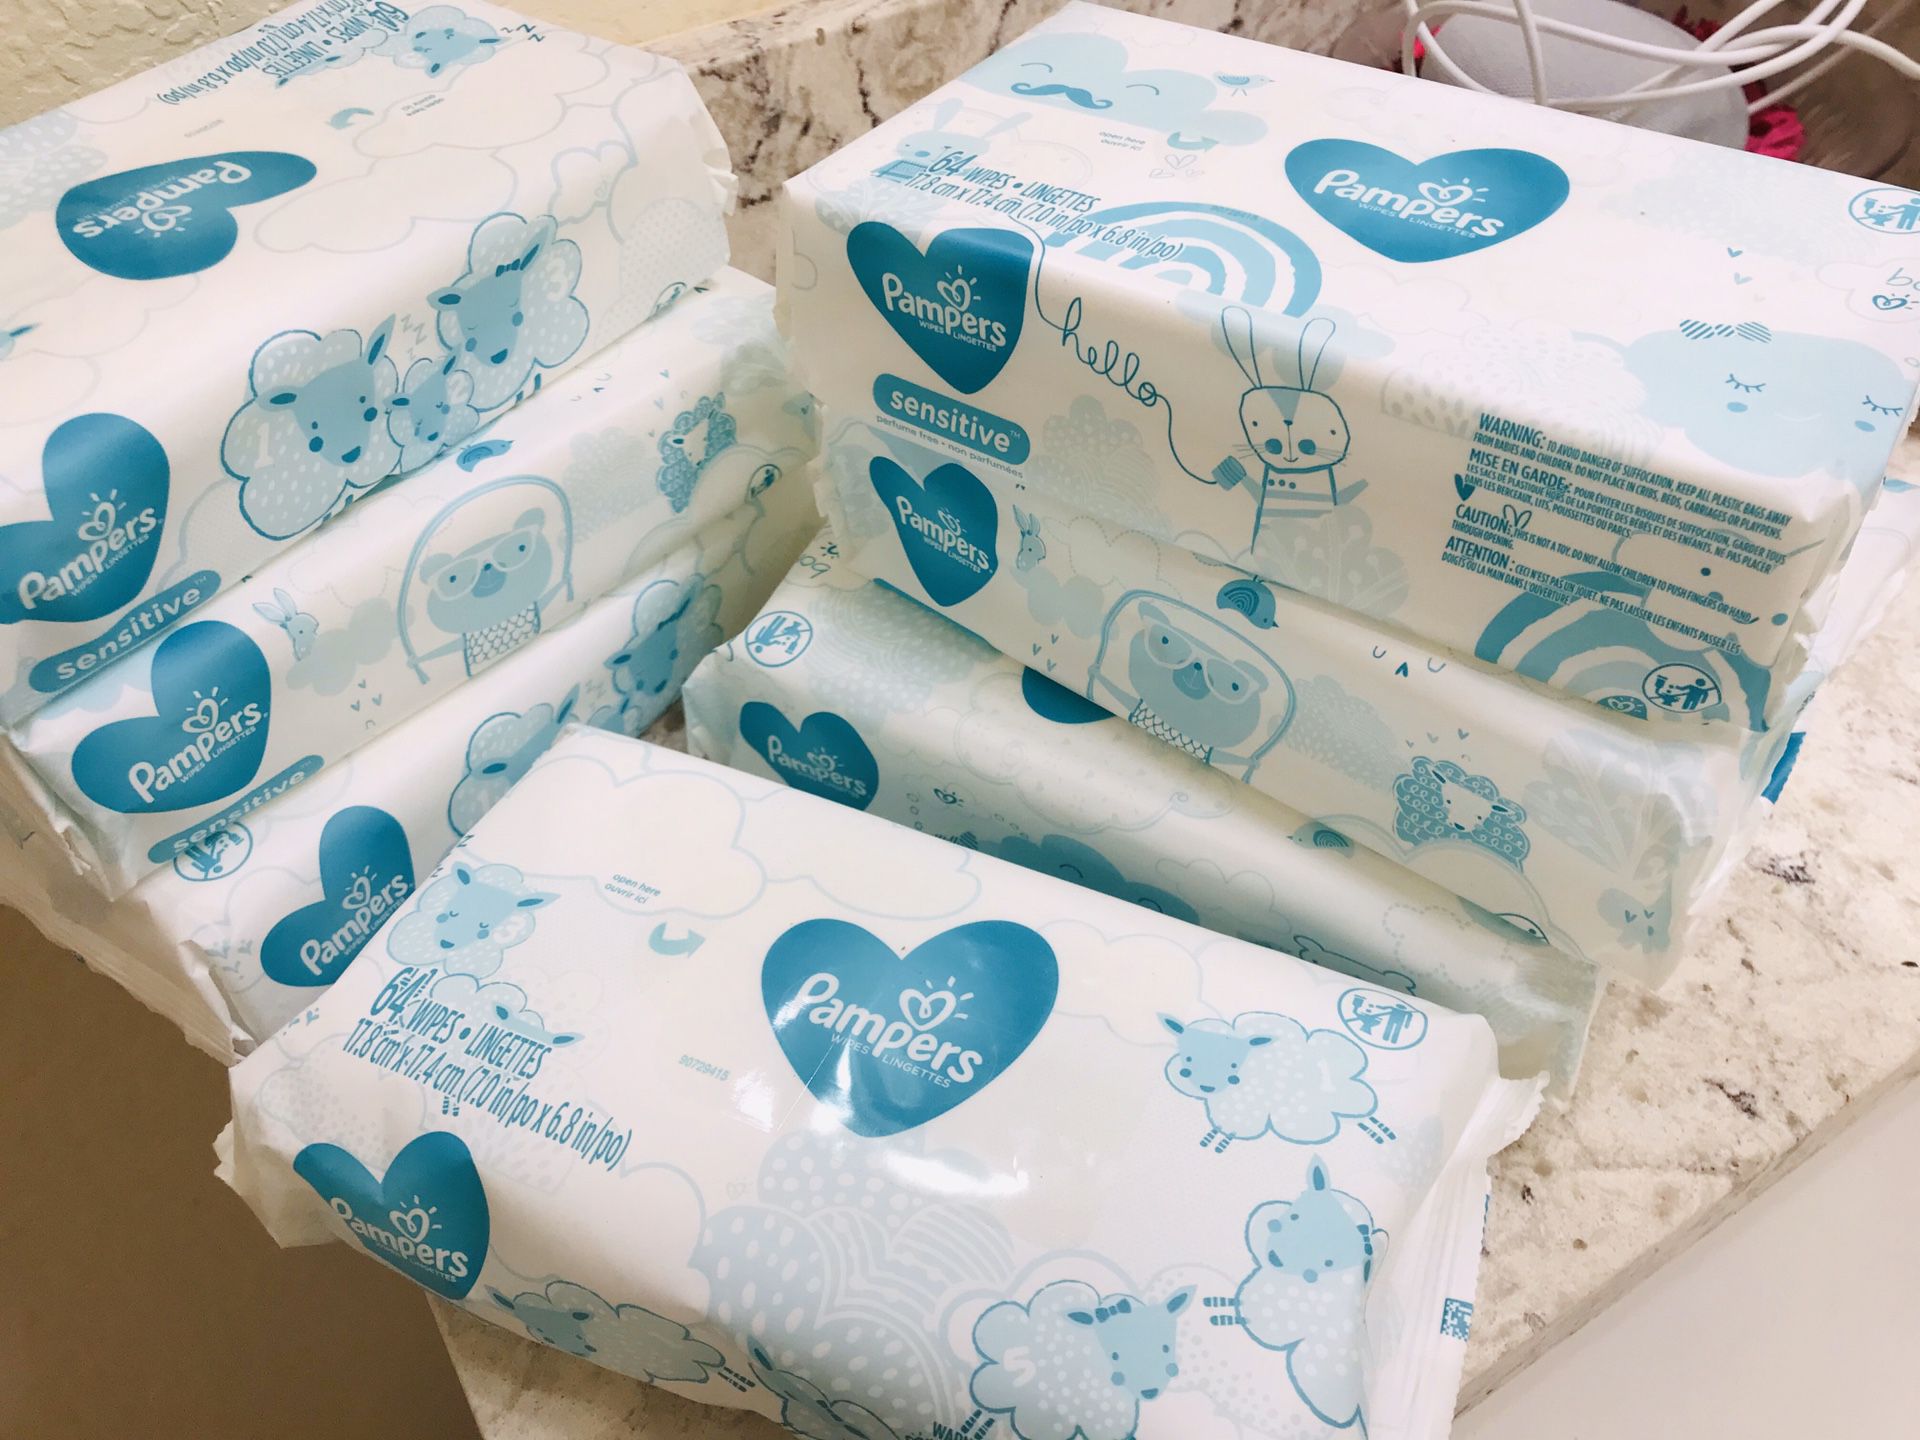 7x64 pampers baby wipes